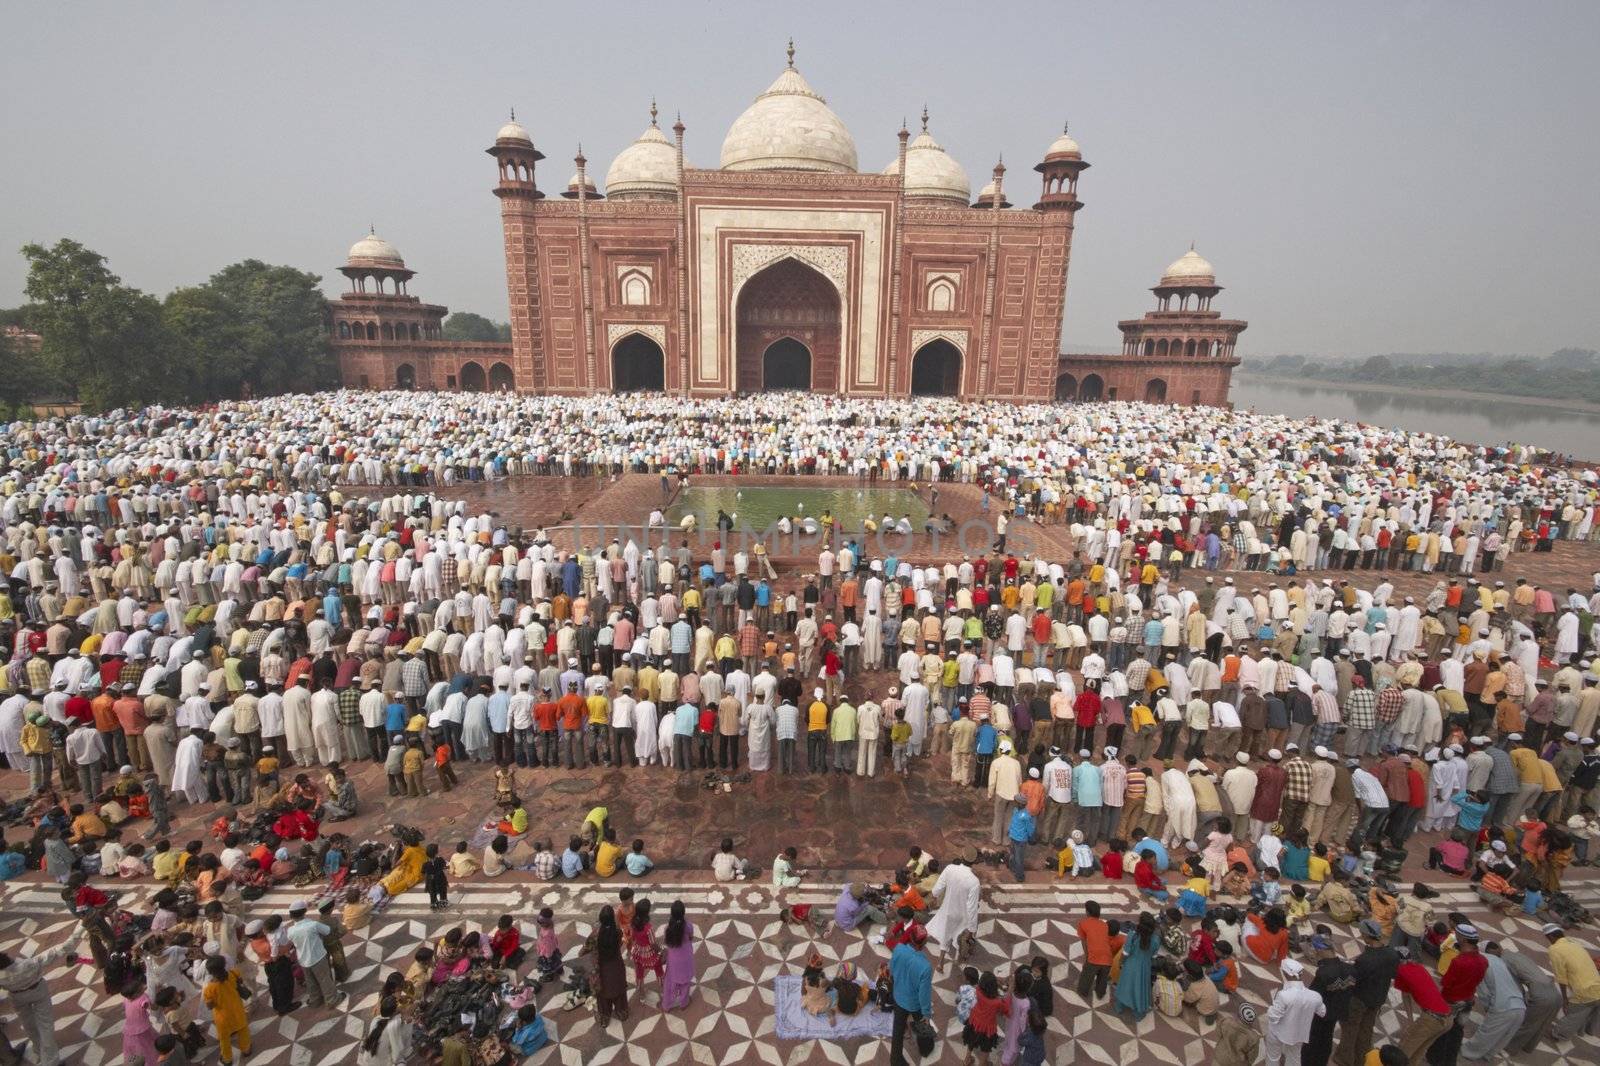 Thousands of people gather in front of the mosque at the Taj Mahal to celebrate the Muslim festival of Eid ul-Fitr in Agra, Uttar Pradesh, India